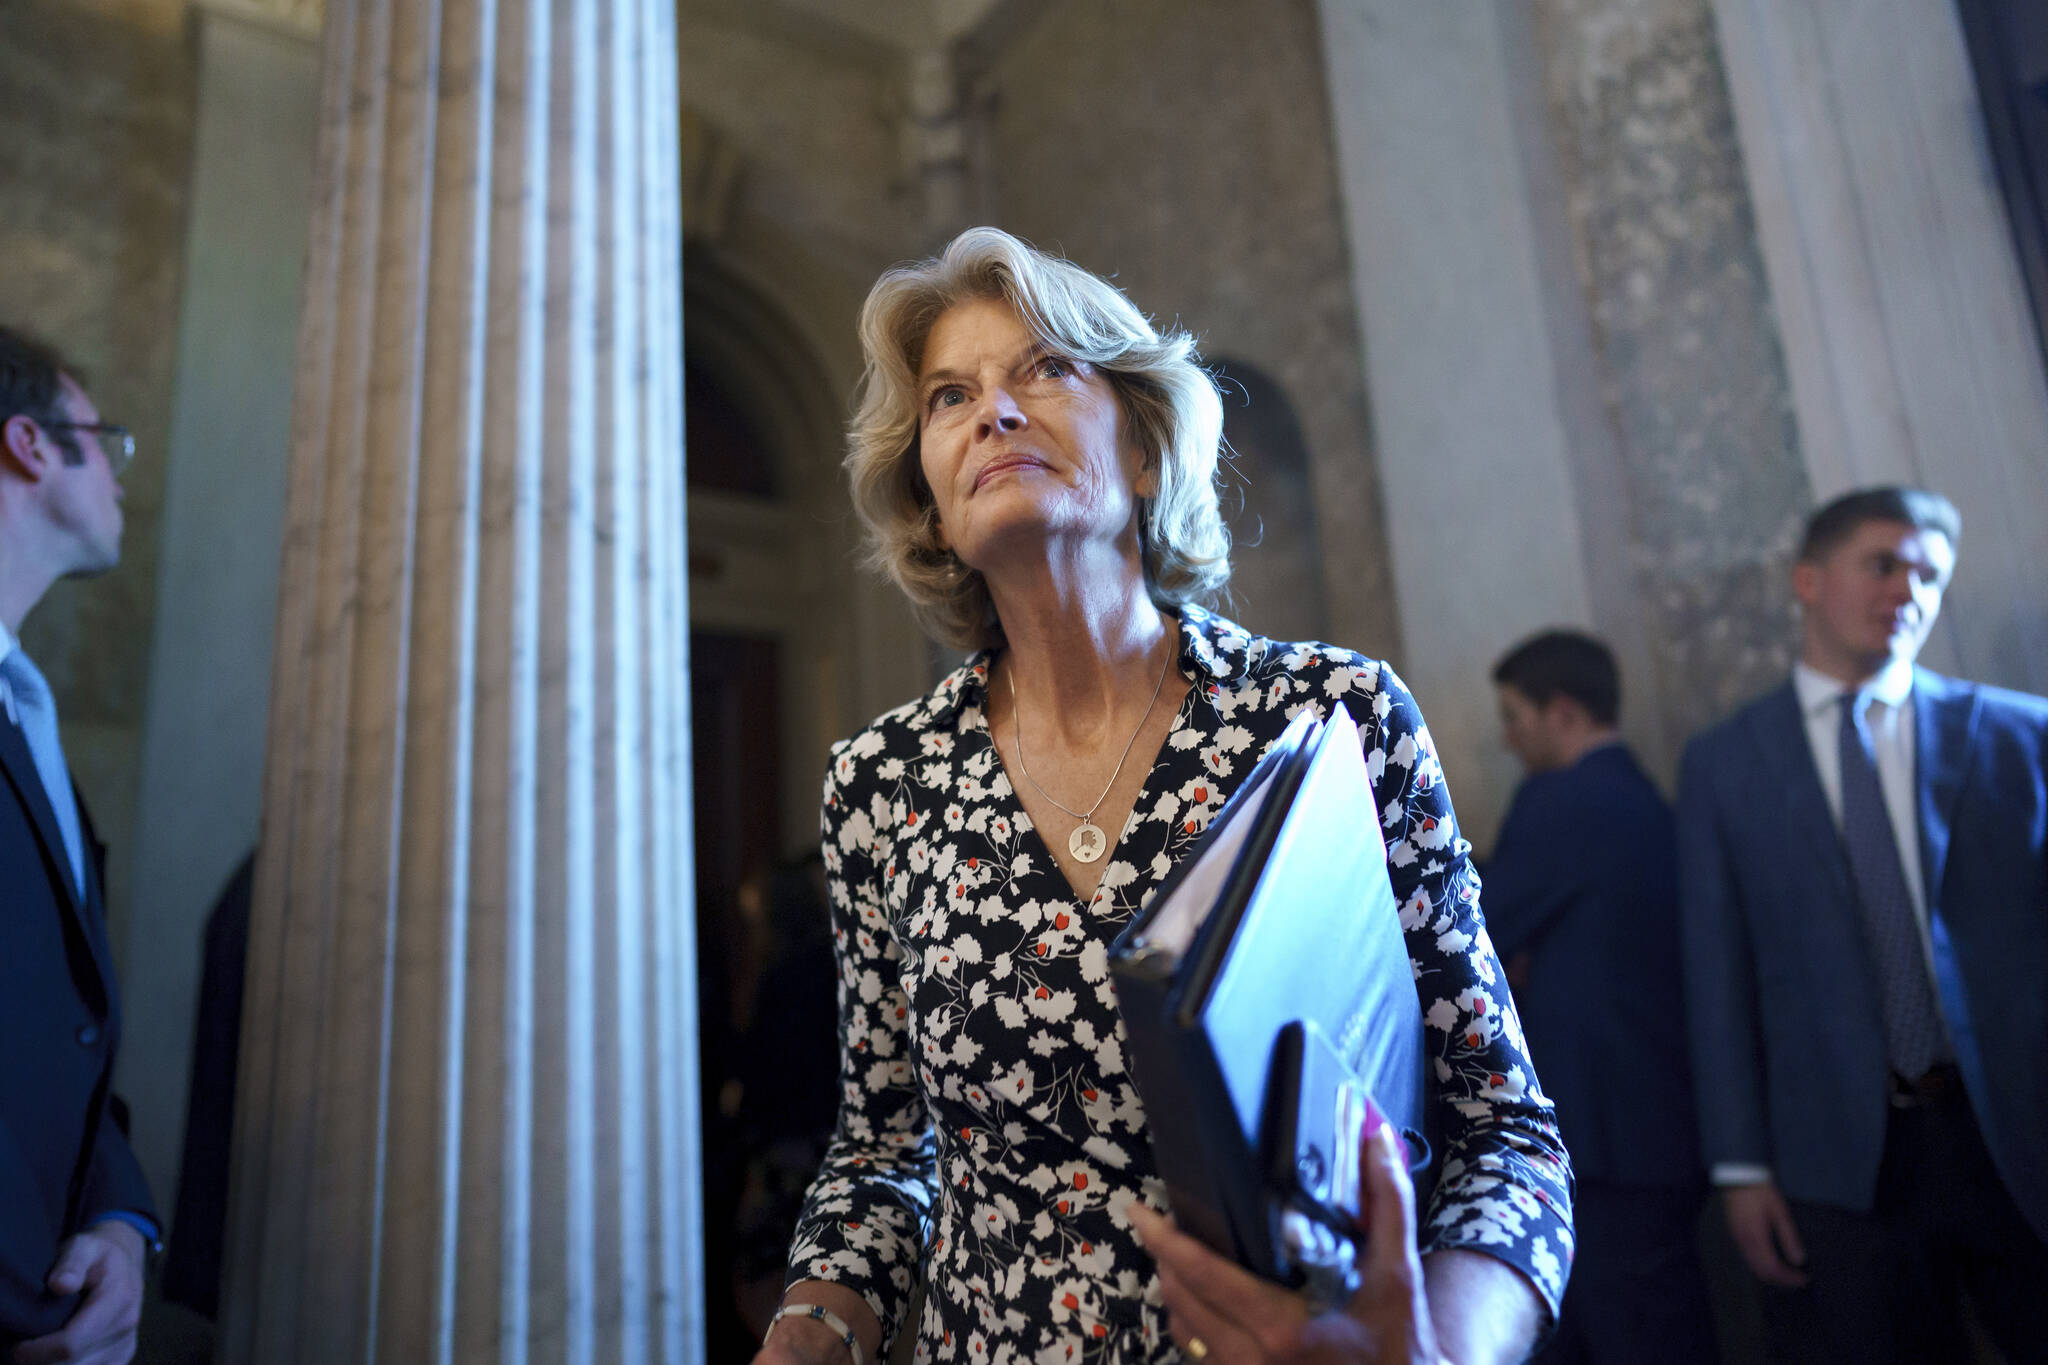 Sen. Lisa Murkowski, R-Alaska, walks to the chamber at the Capitol in Washington, Thursday, Aug. 5, 2021. Murkowski, who voted to convict Donald Trump in his second impeachment trial and has repeatedly bumped heads with the former president, announced Friday, Nov. 12, that she will run for reelection. (AP Photo/J. Scott Applewhite)